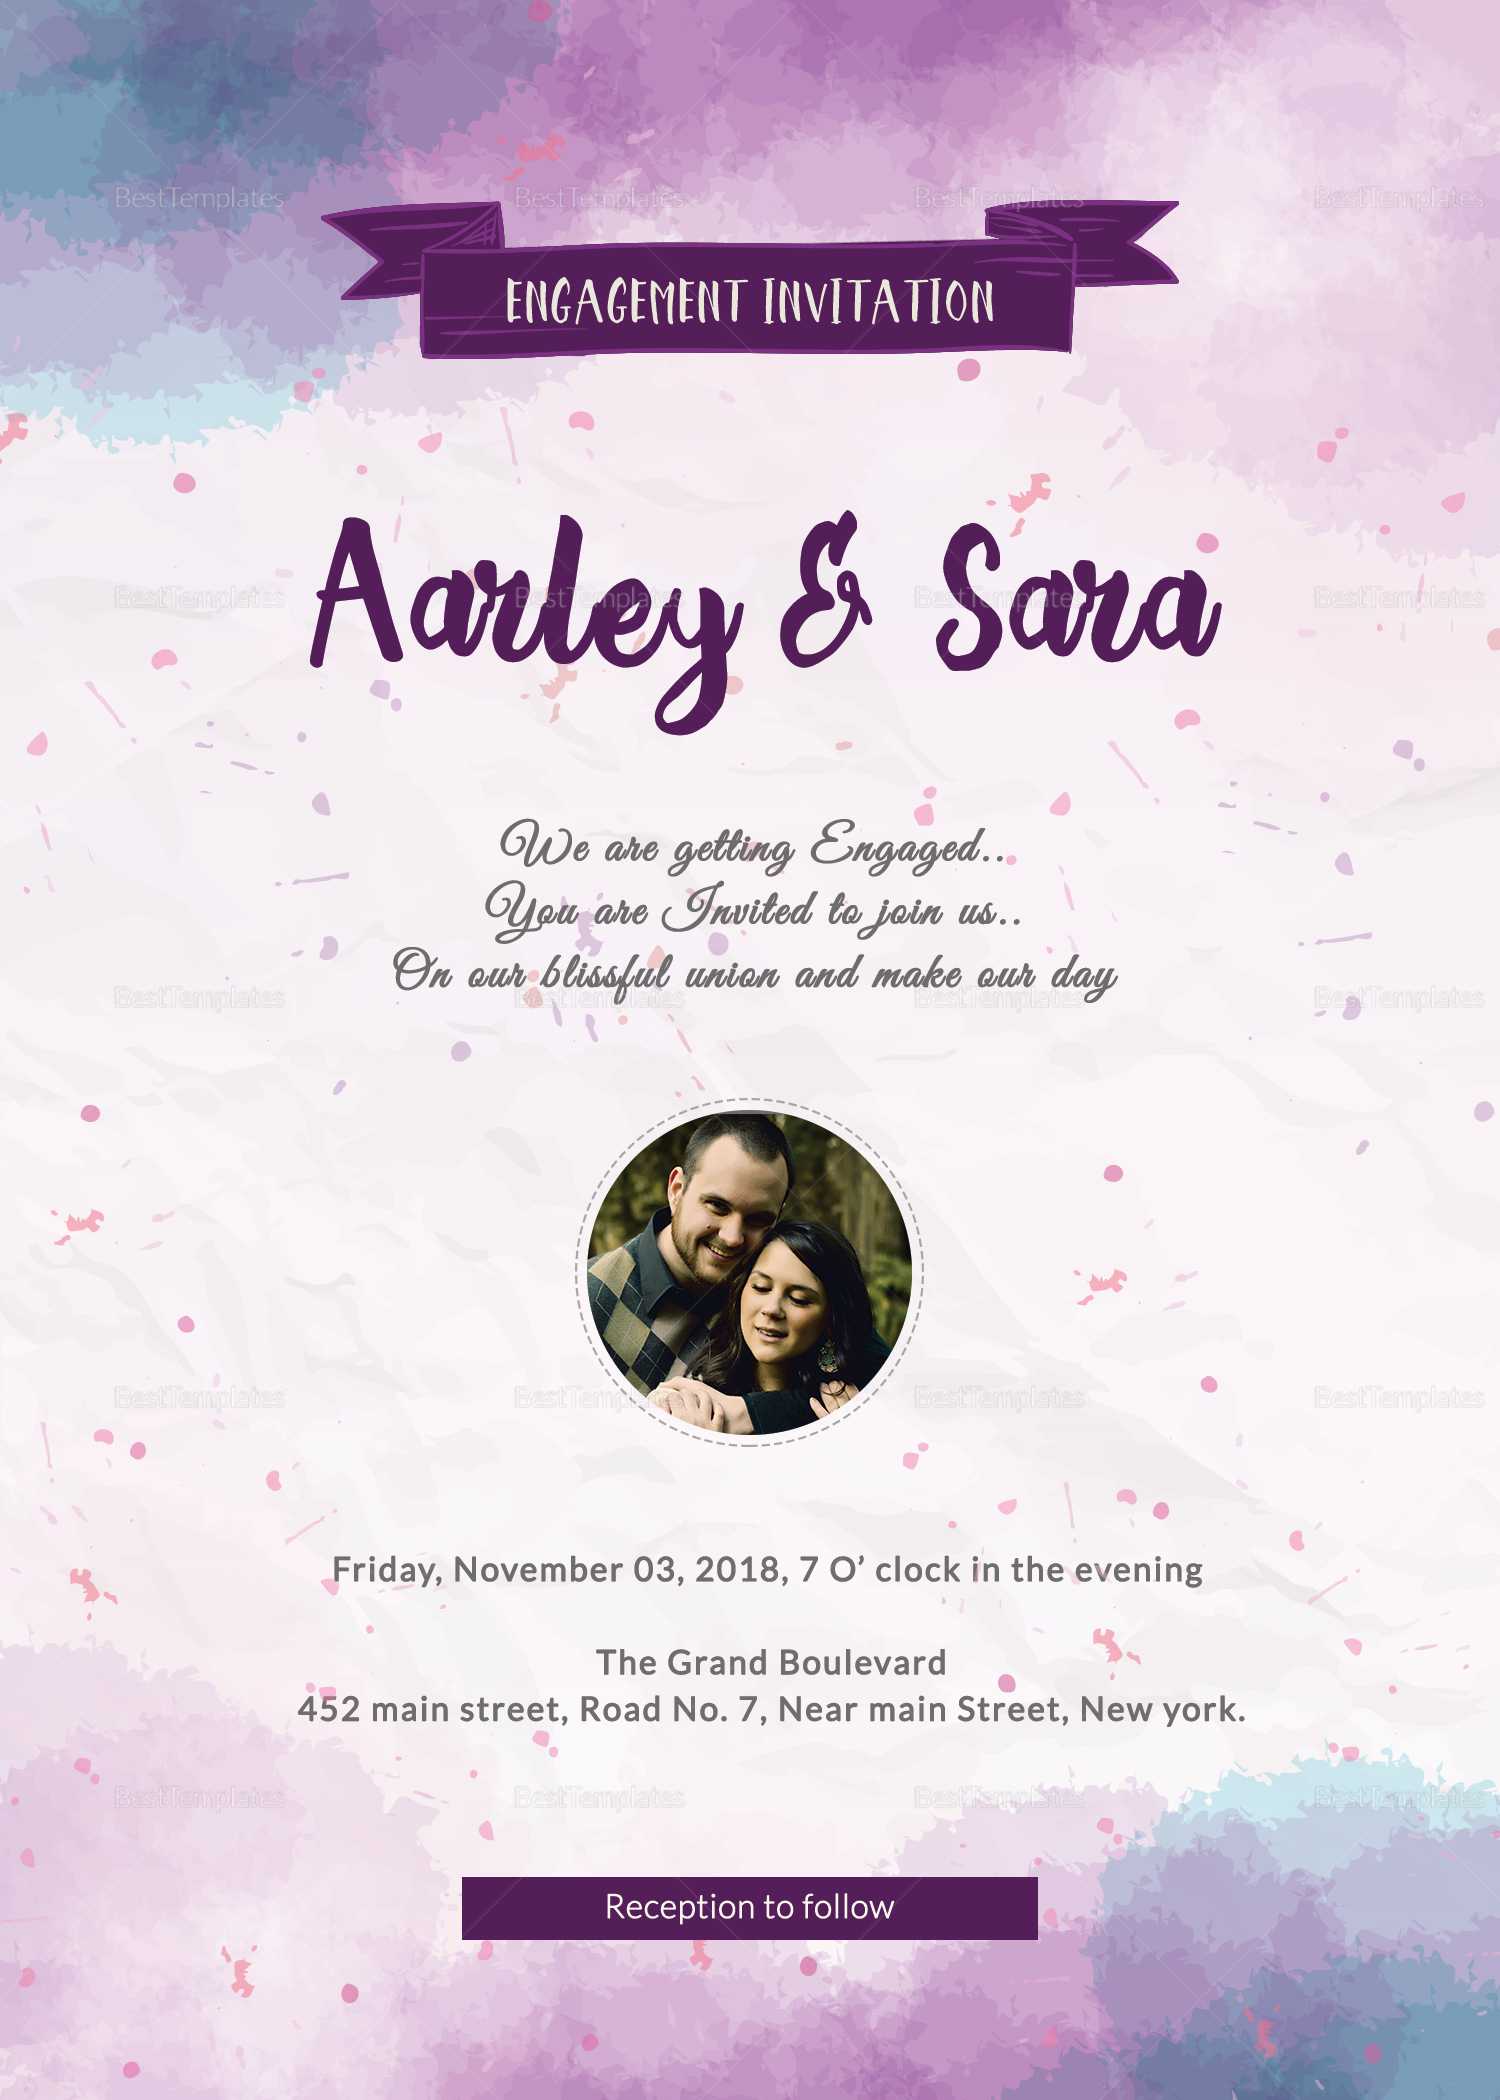 Engagement Party Invitation Card Template For Engagement Invitation Card Template